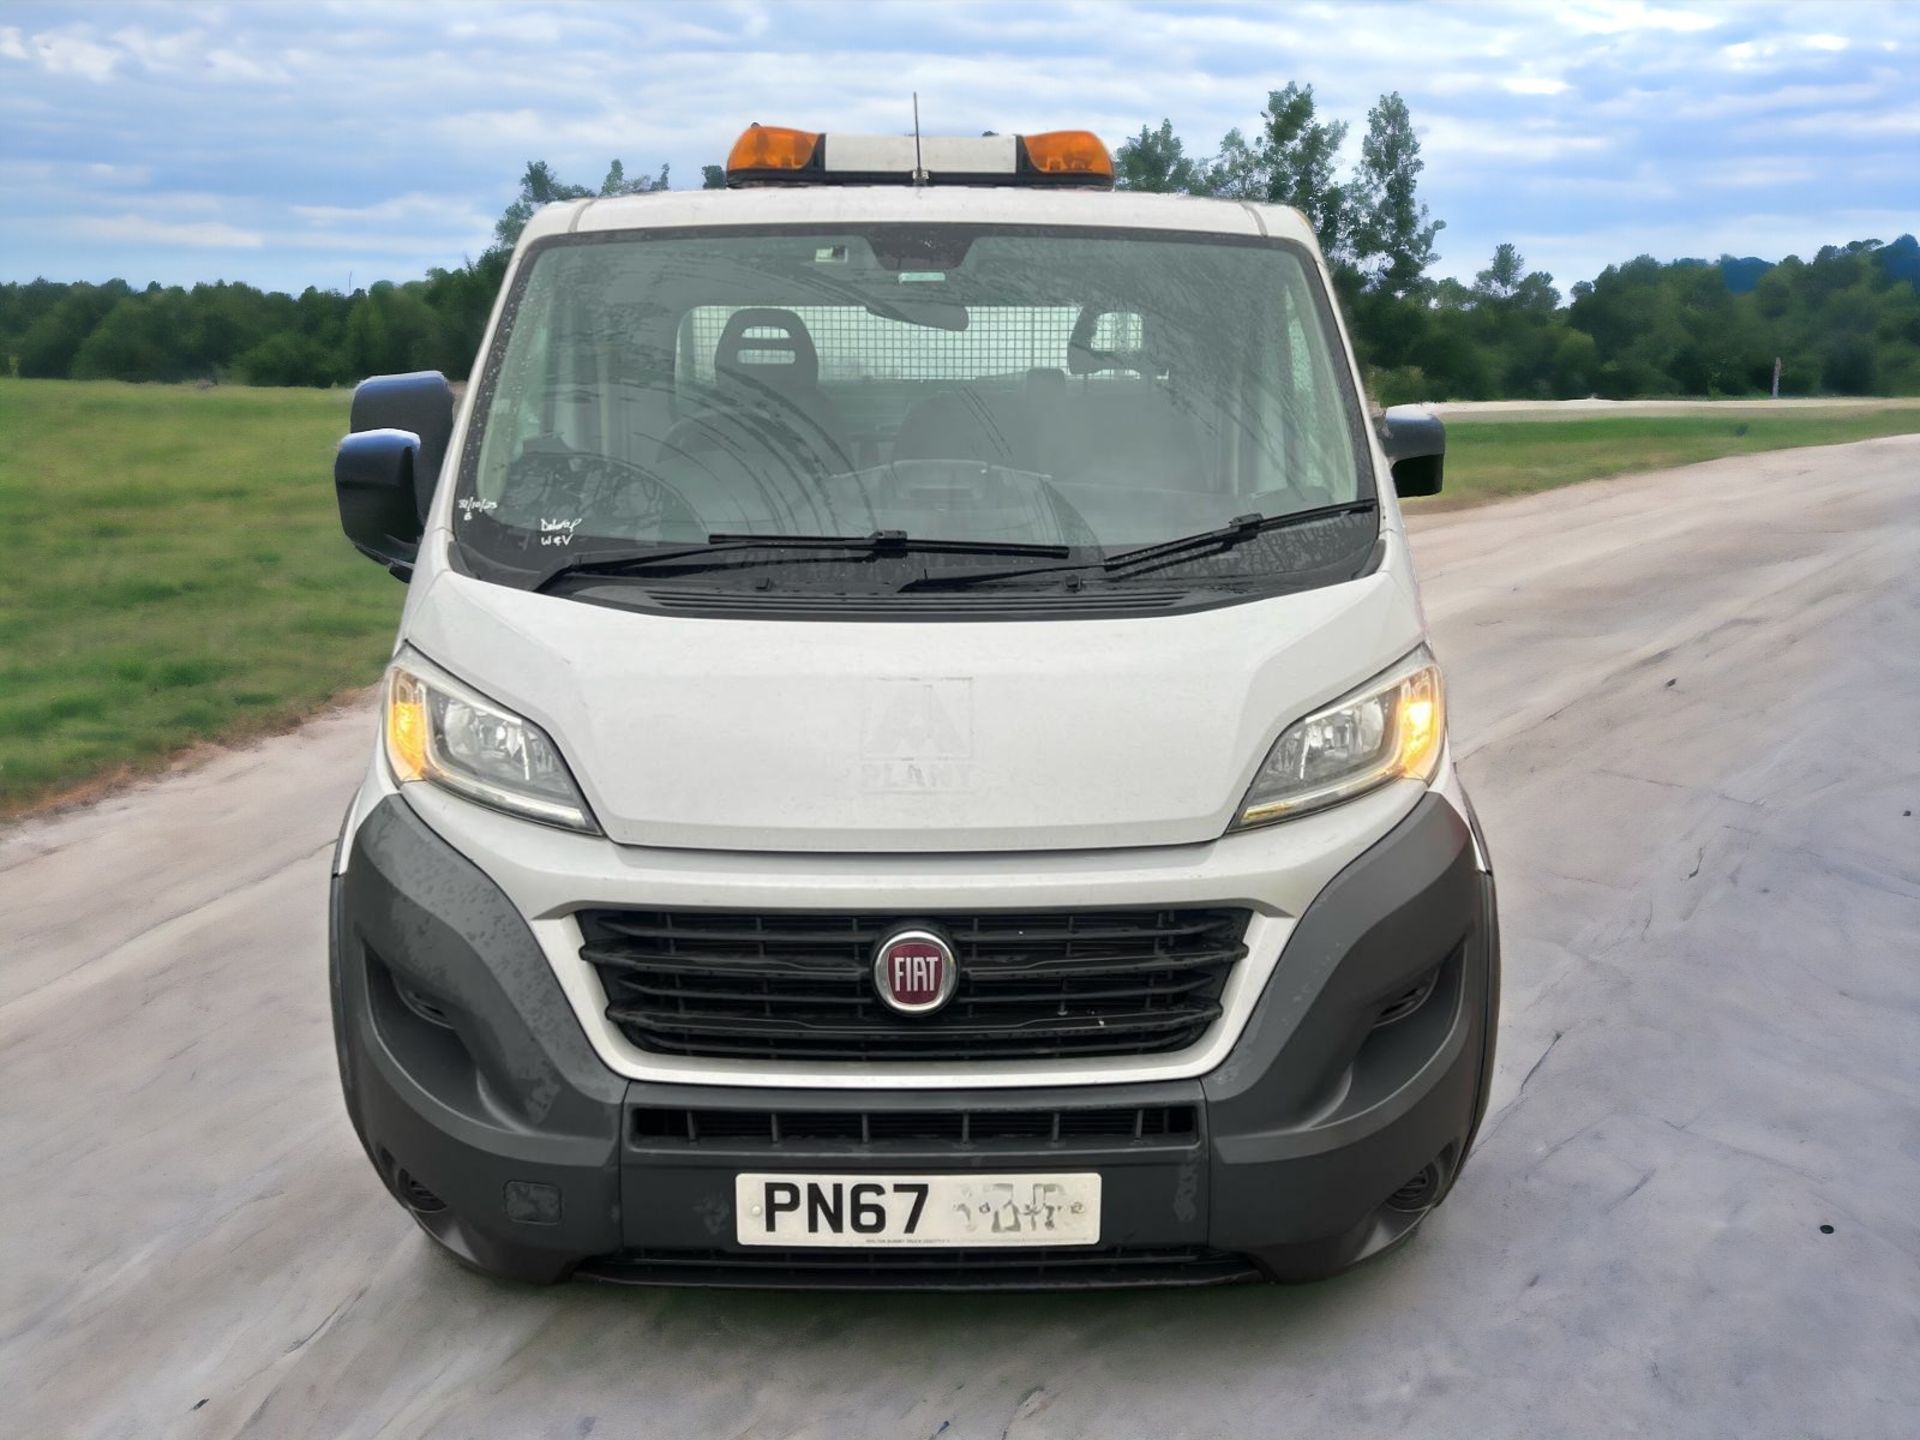 2017 FIAT DUCATO DROPSIDE TRUCK - RELIABLE AND EFFICIENT WORK COMPANION